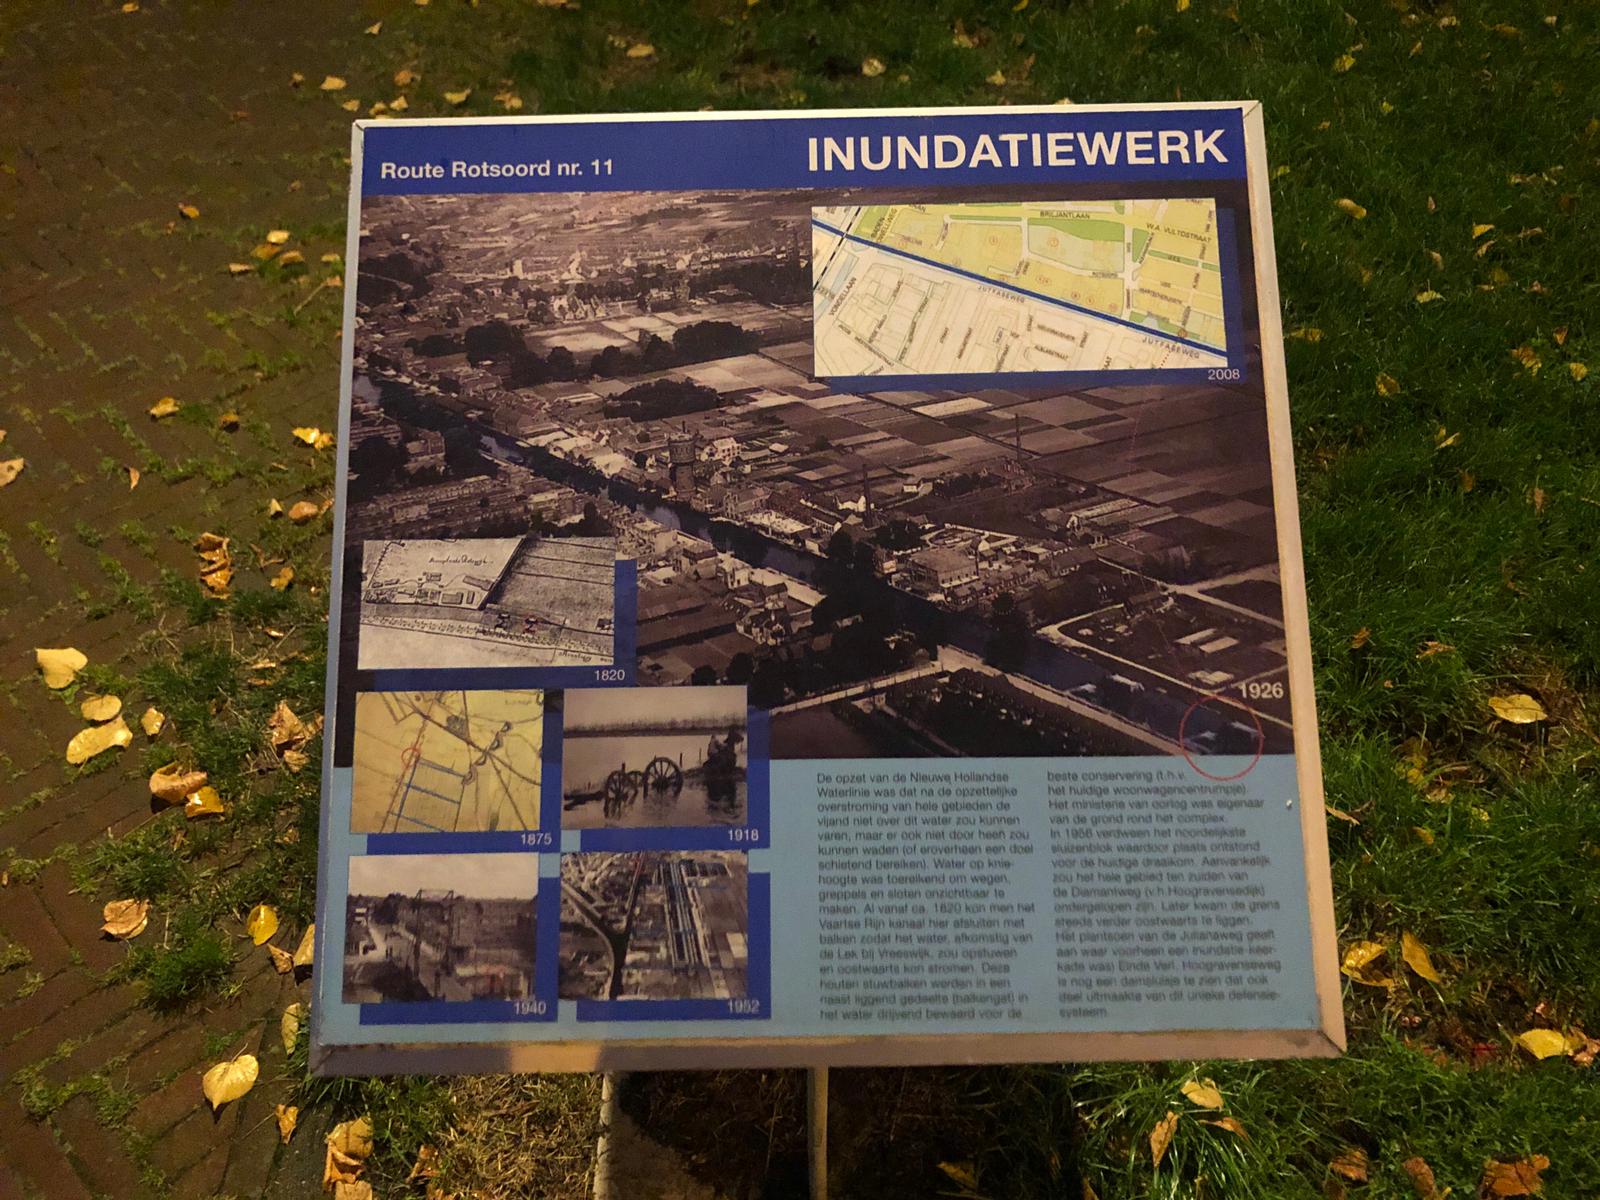 Route Rotsoord no. 11 – Inundation Works